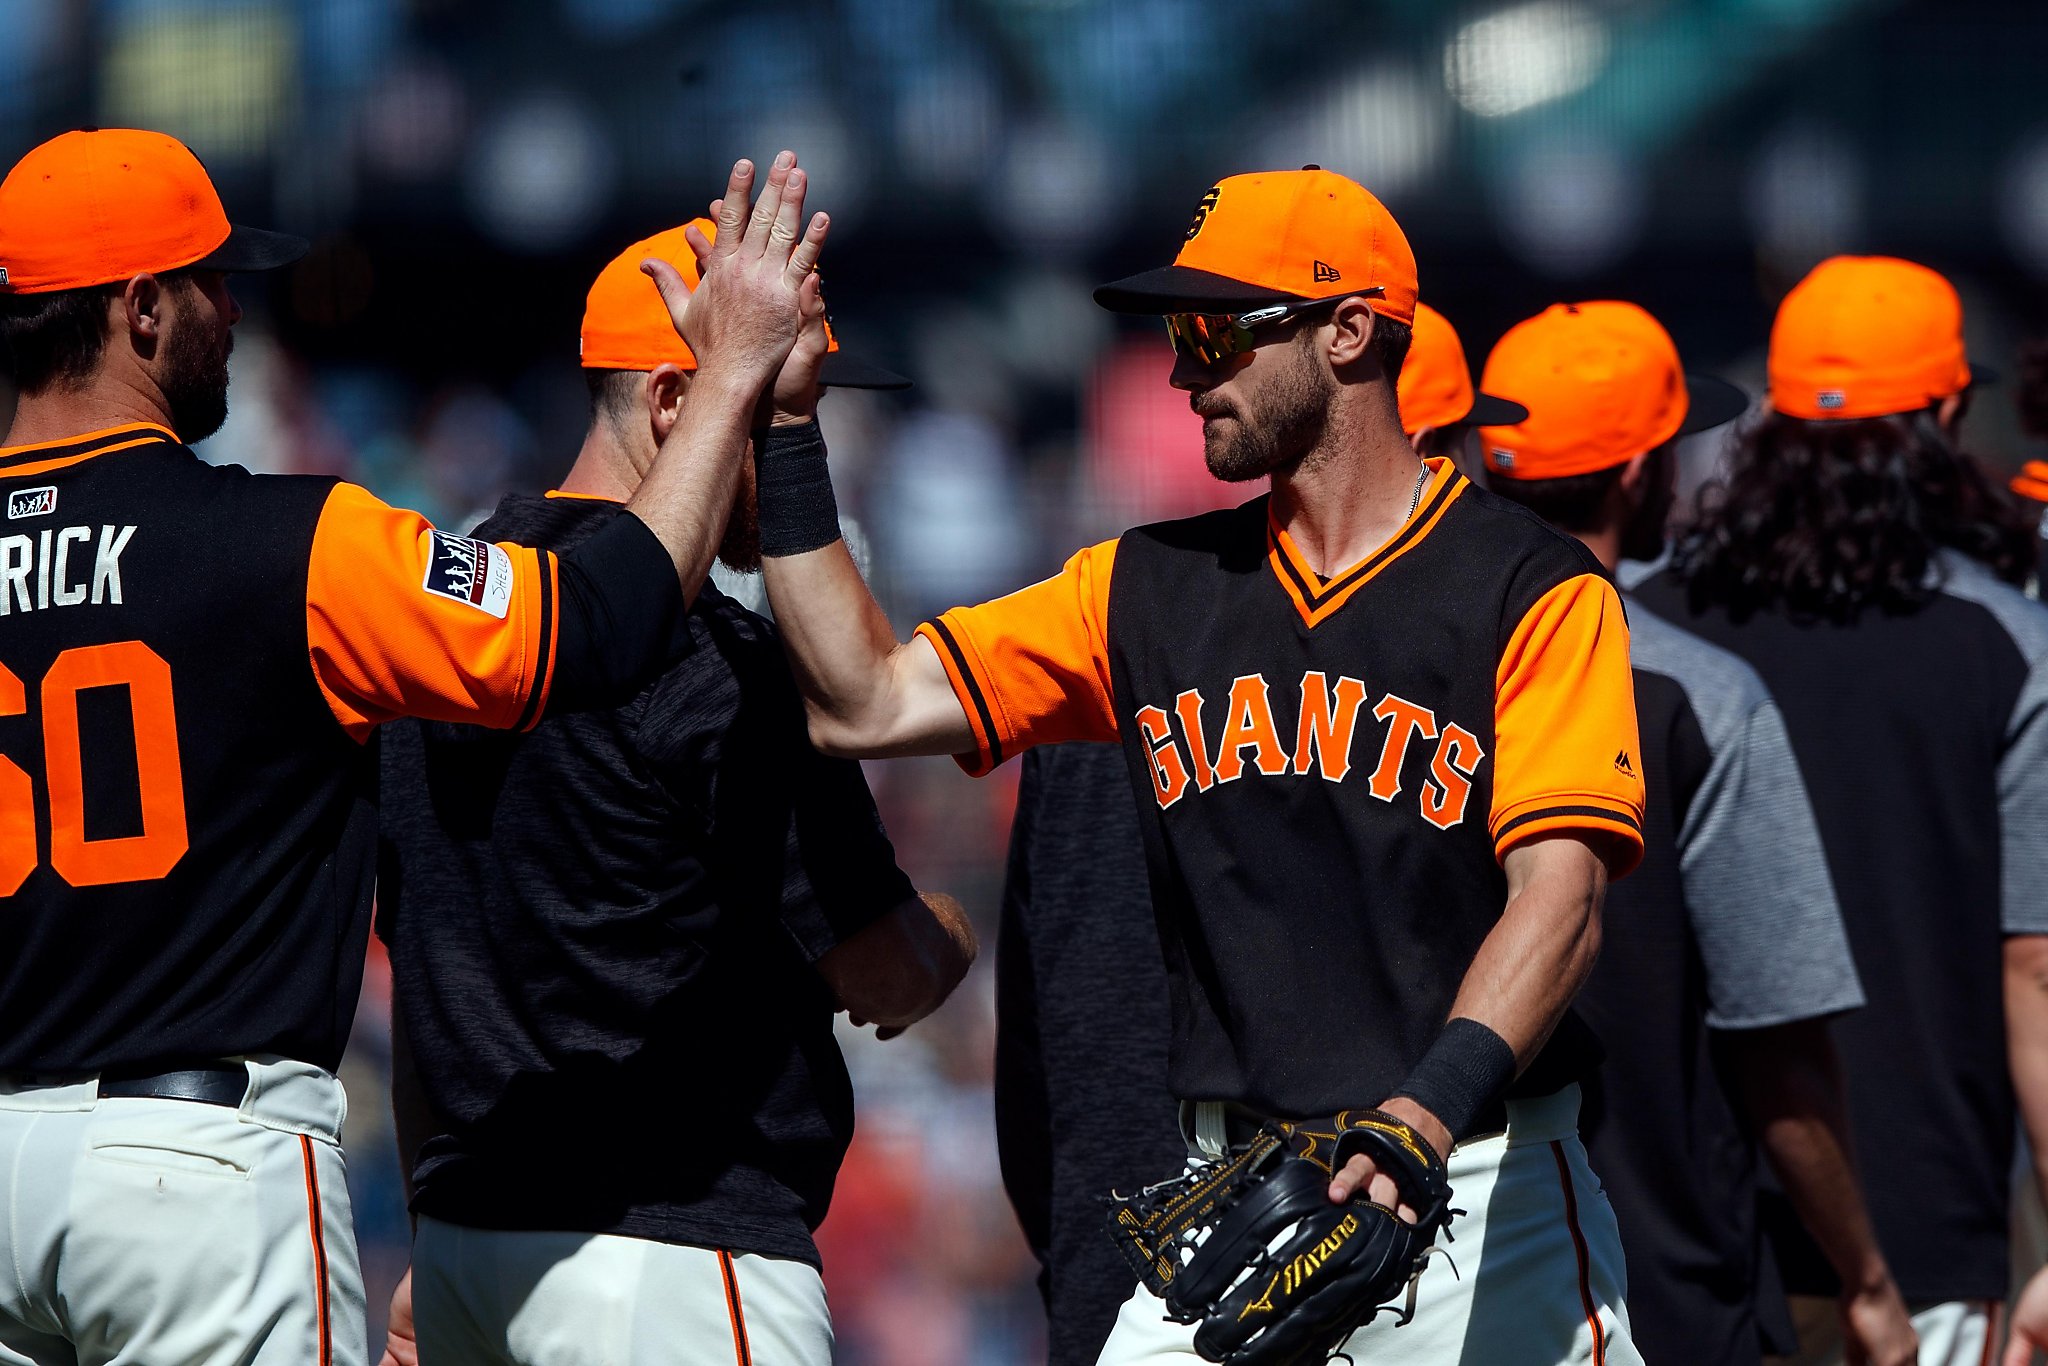 Giants announce details of outfield dimensions, bullpen relocations